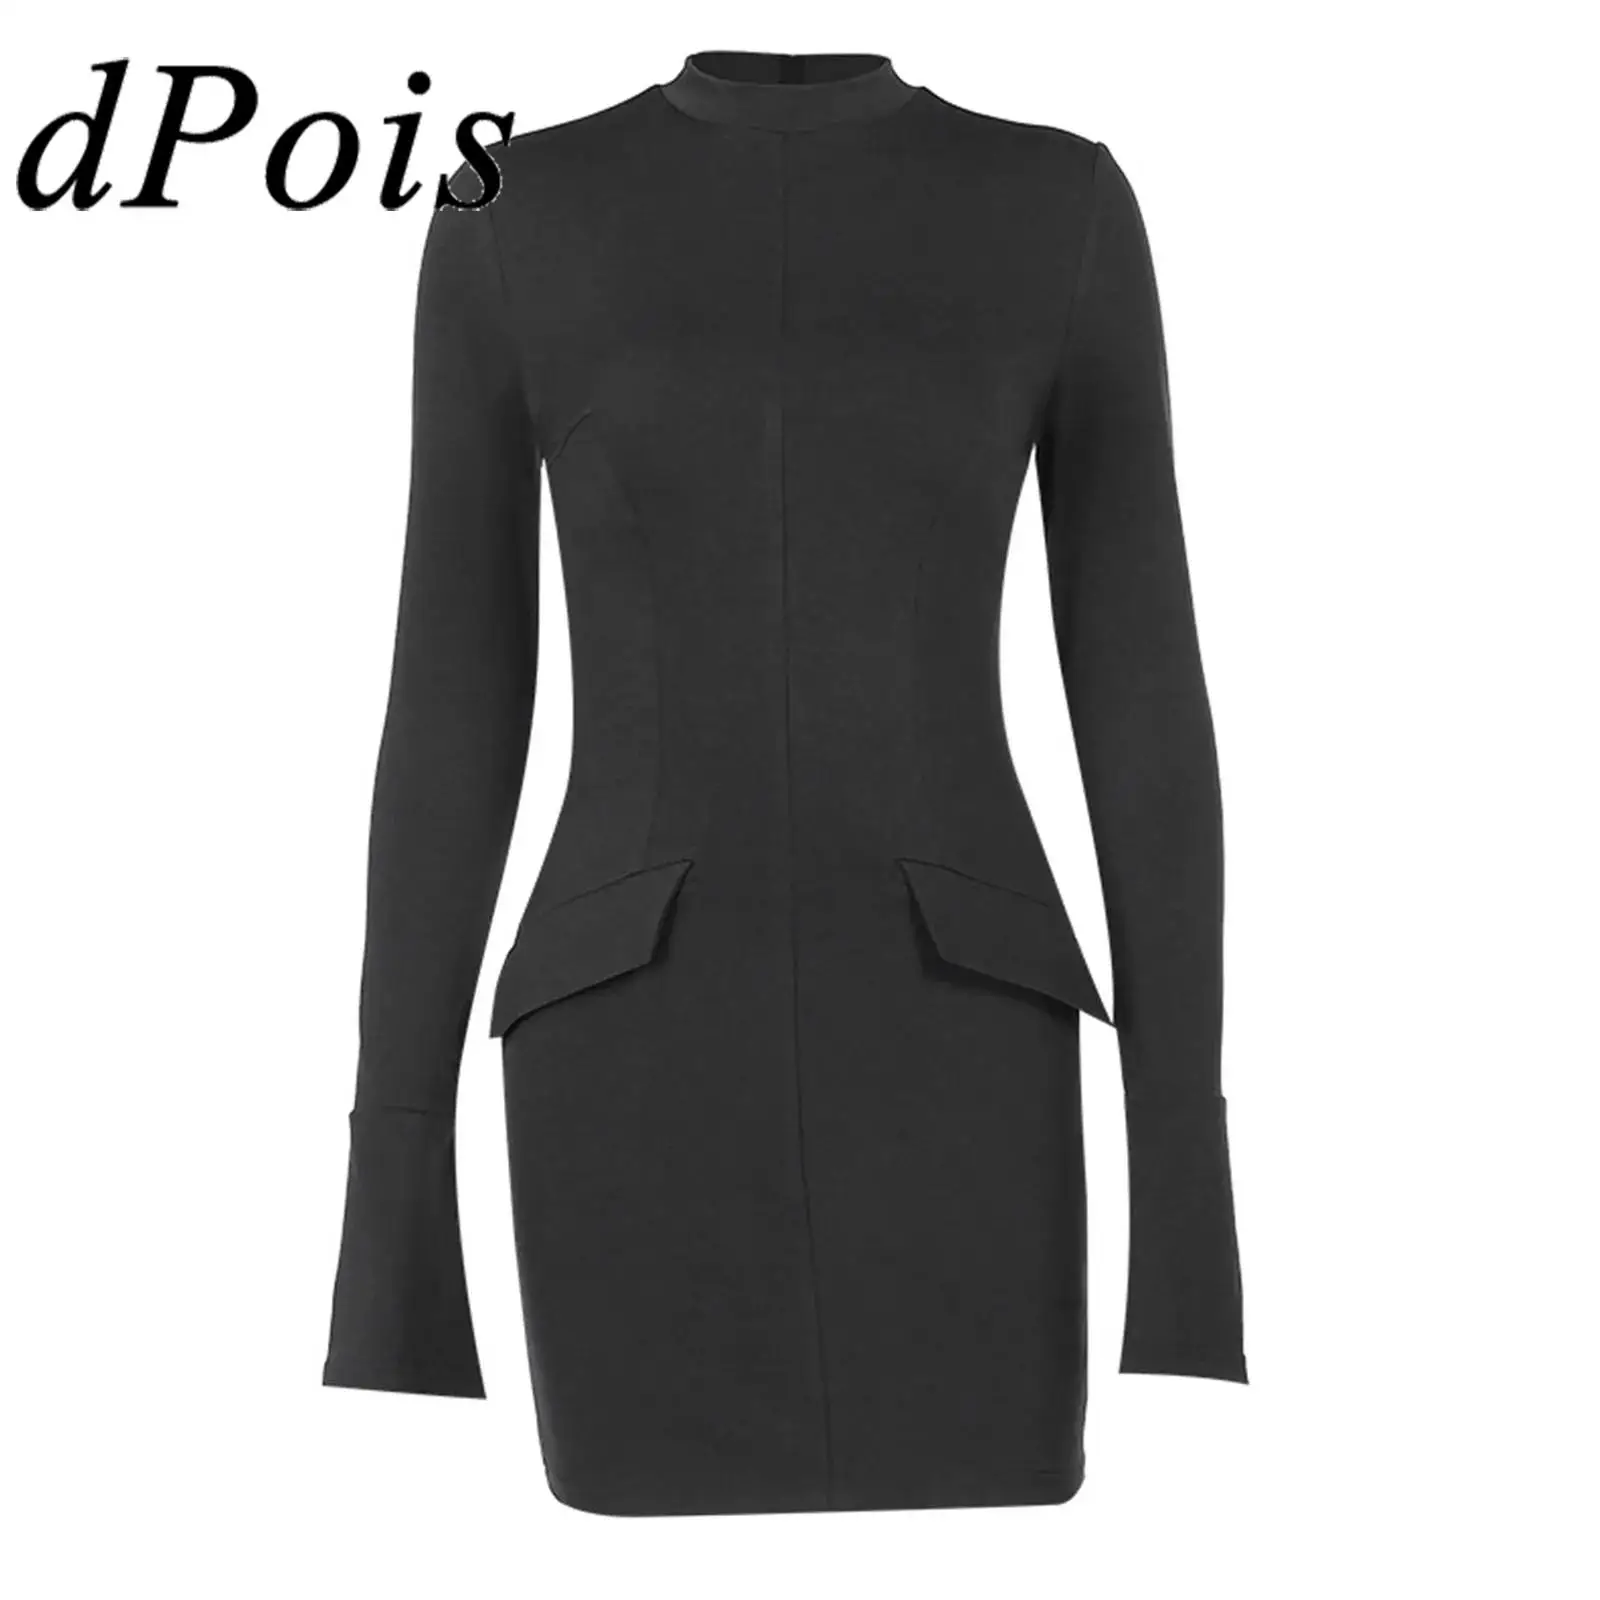 

Womens Elegant Bodycon Dresses Femme Fashion Mock Neck Long Sleeve Mini Dress for Office Commuting Cocktail Party Club Robe